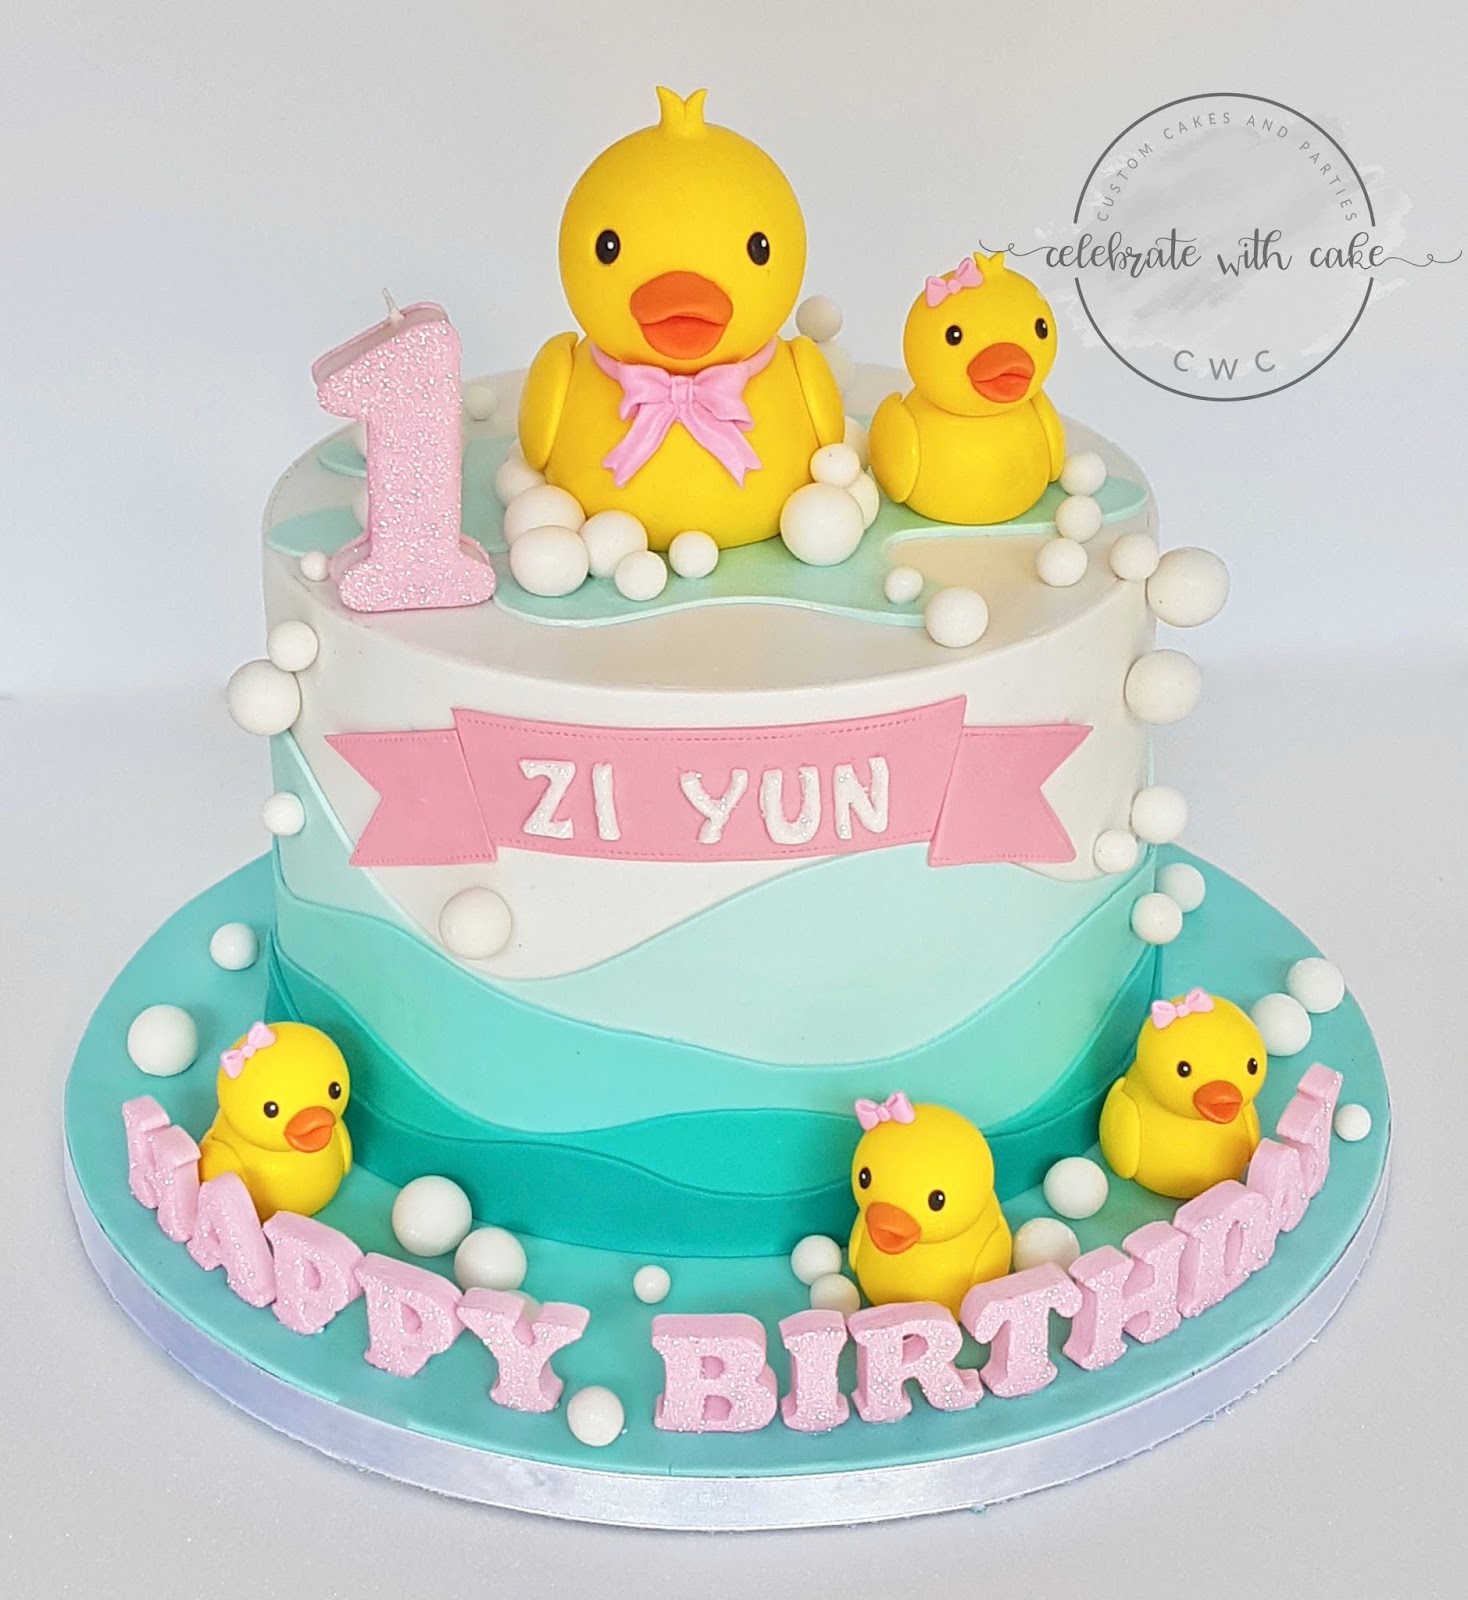 Celebrate With Cake Rubber Duckies At Bath Cake